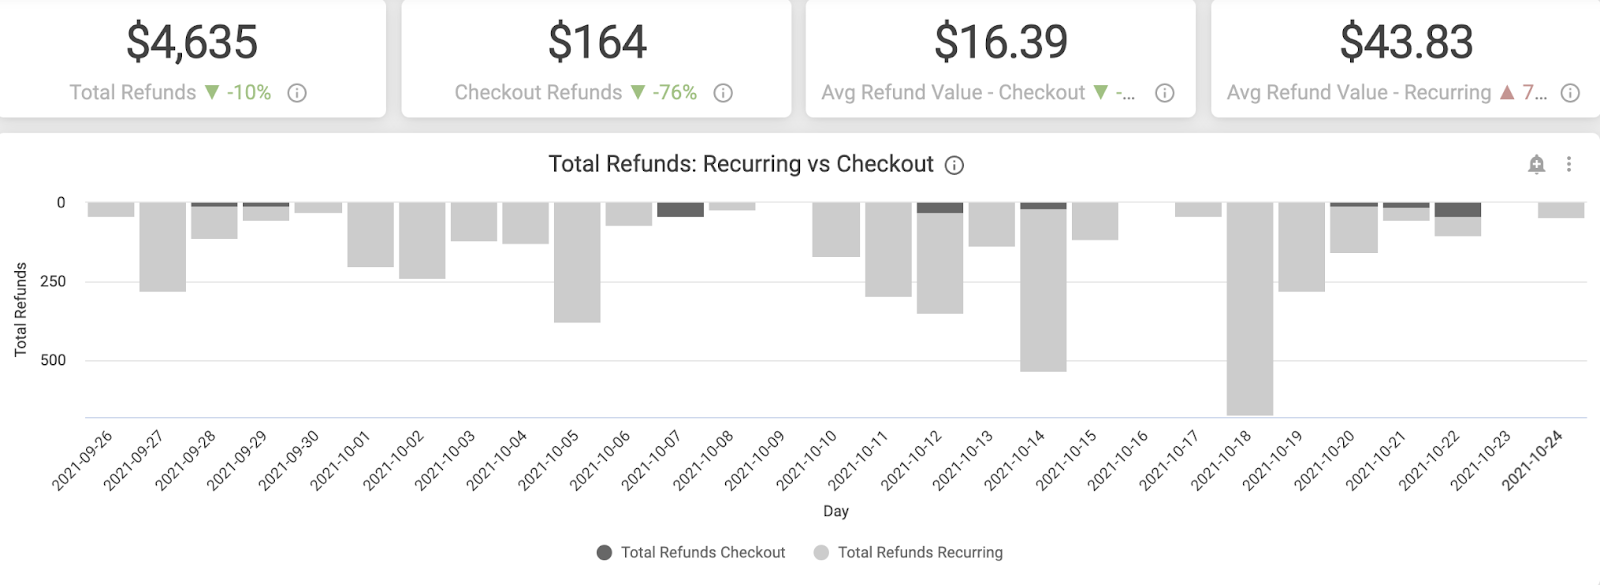 Refunds chart shown in the enhanced analytics suite.